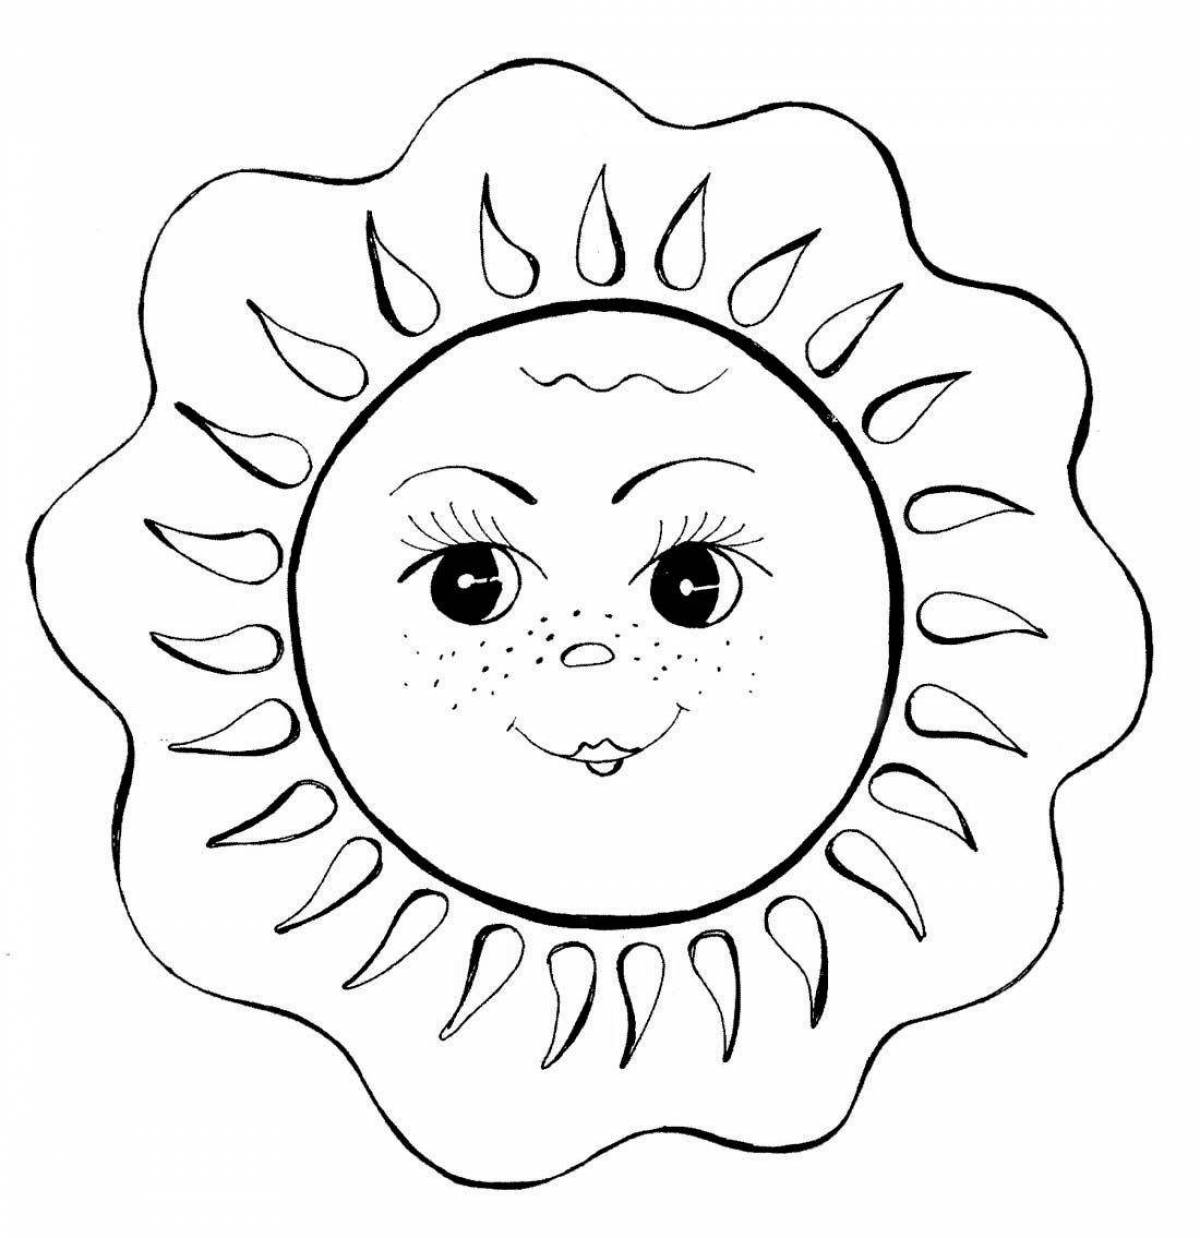 Solar coloring sun for children 2-3 years old